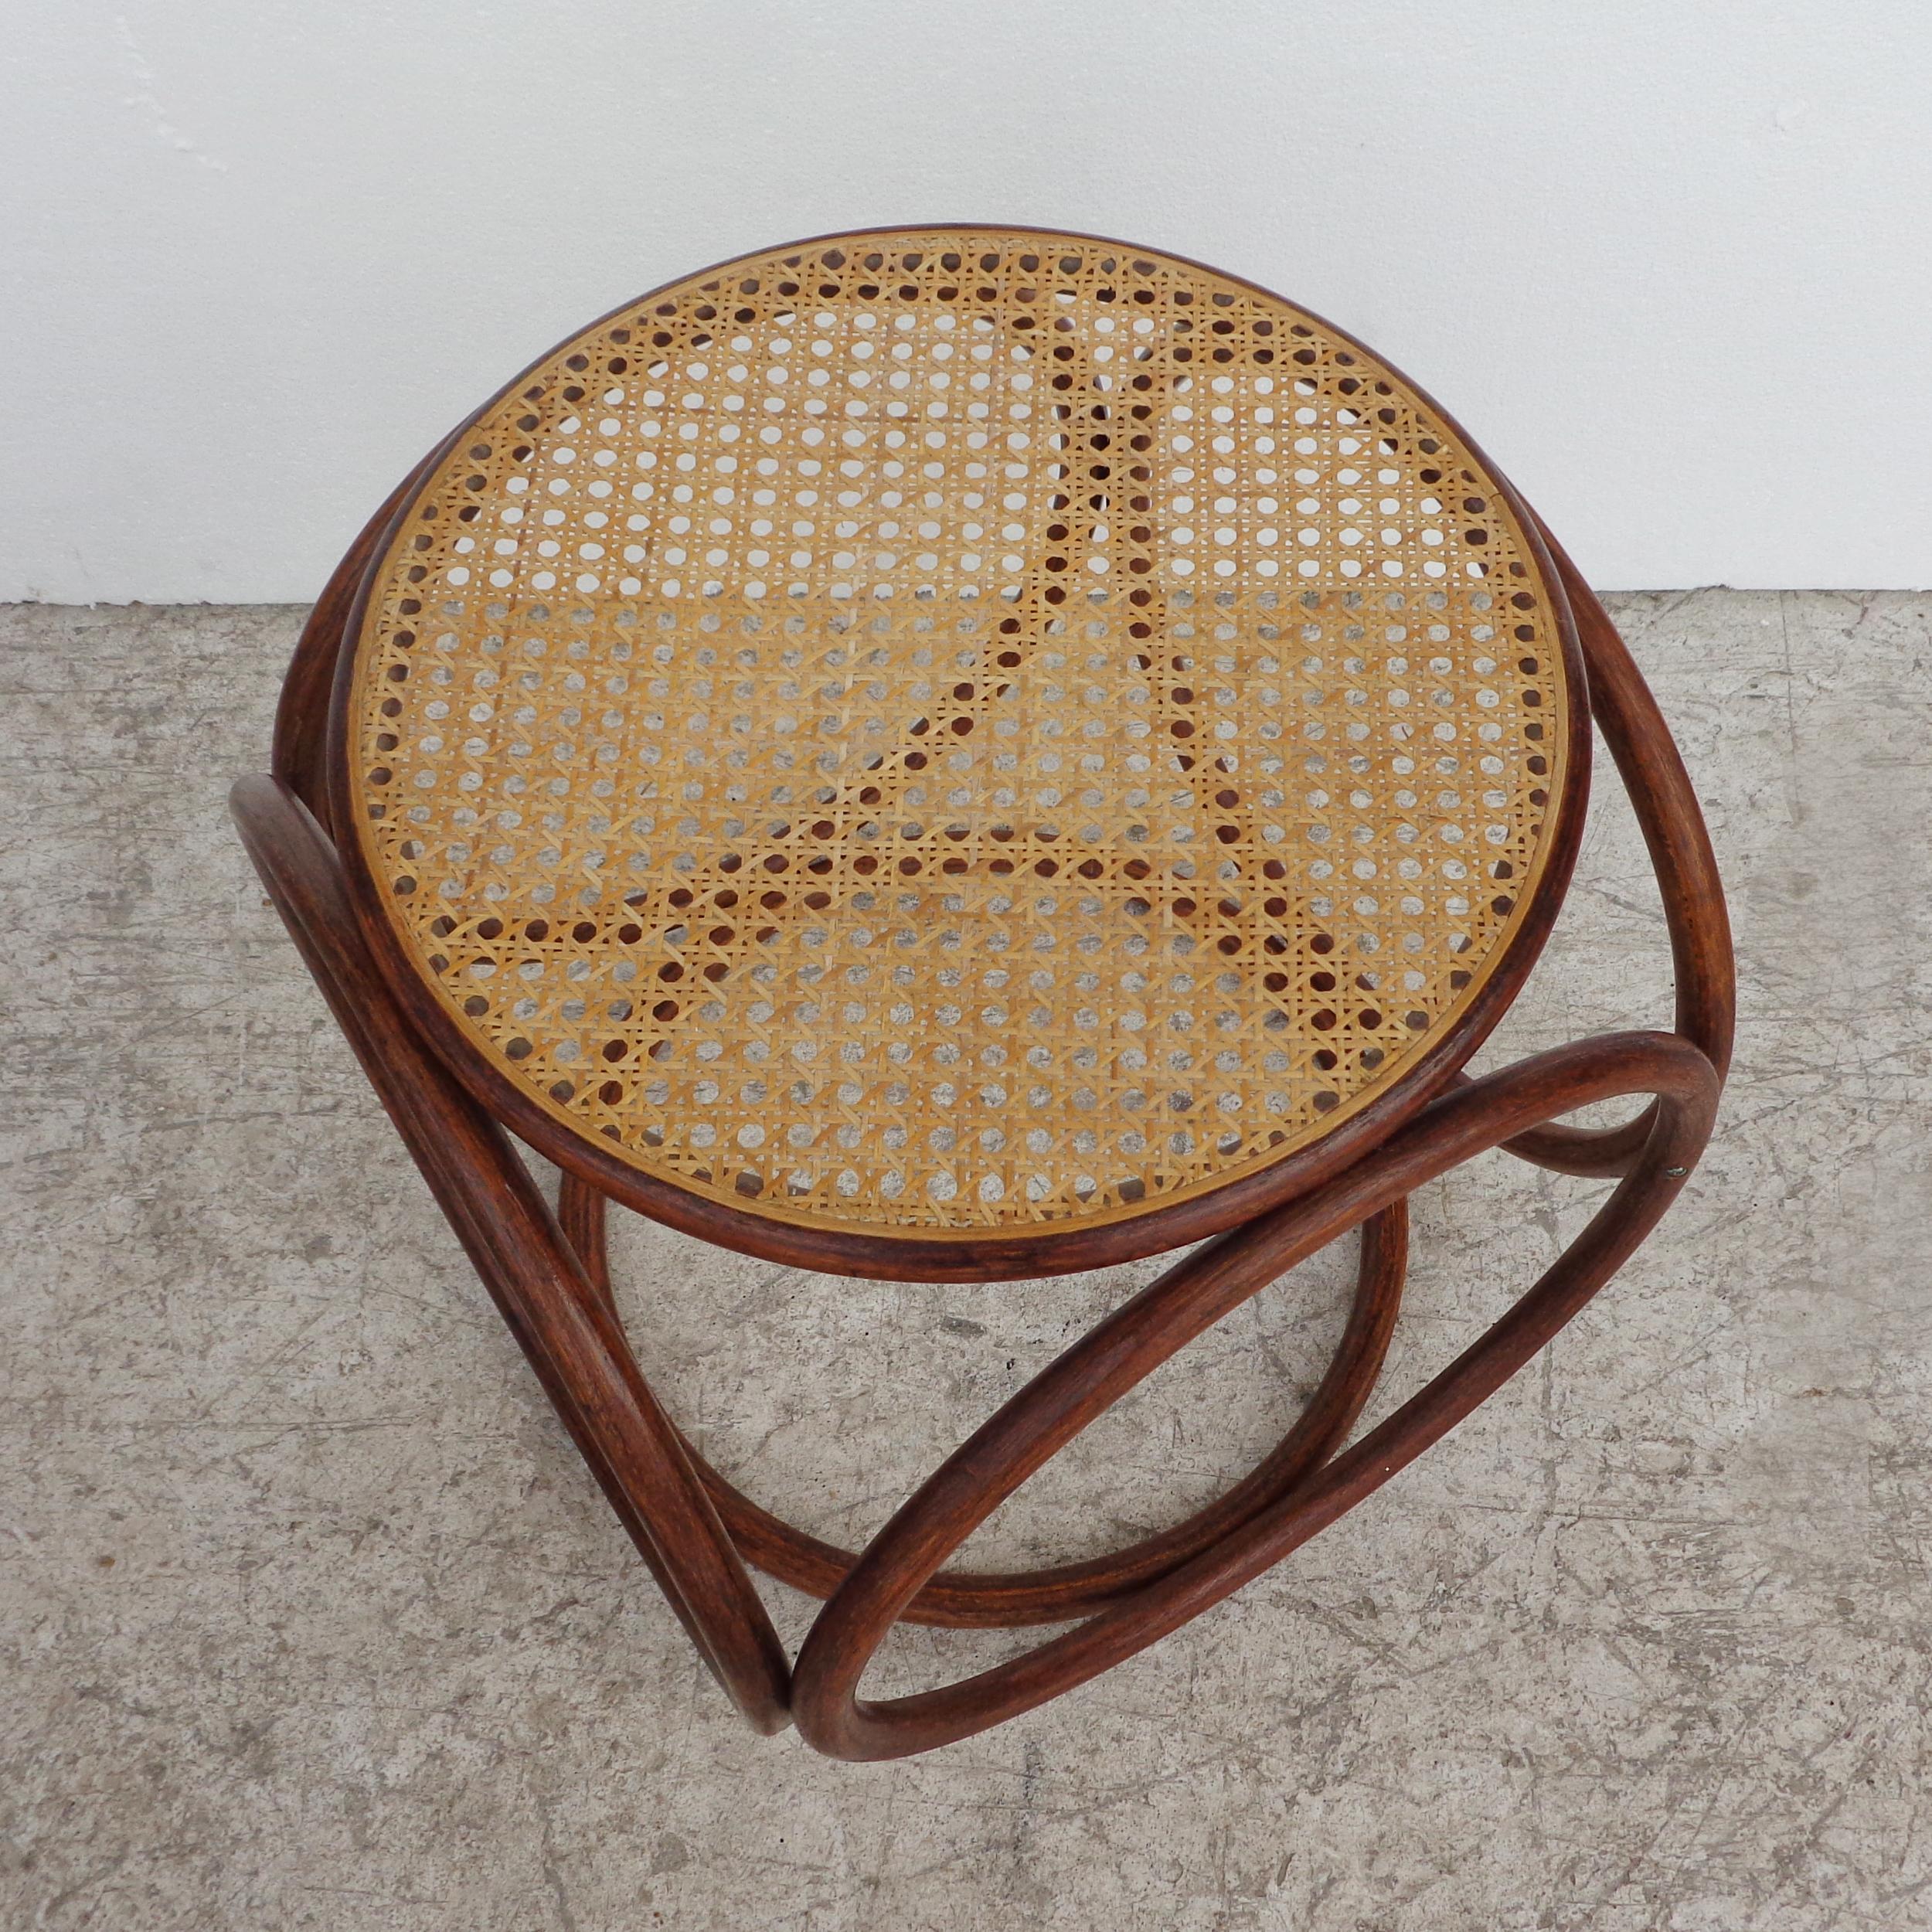 Thonet Bentwood Cane Side Table Bench

 
A classic Thonet piece of bentwood and cane. Great as a stool or side table.

Height: 15.25